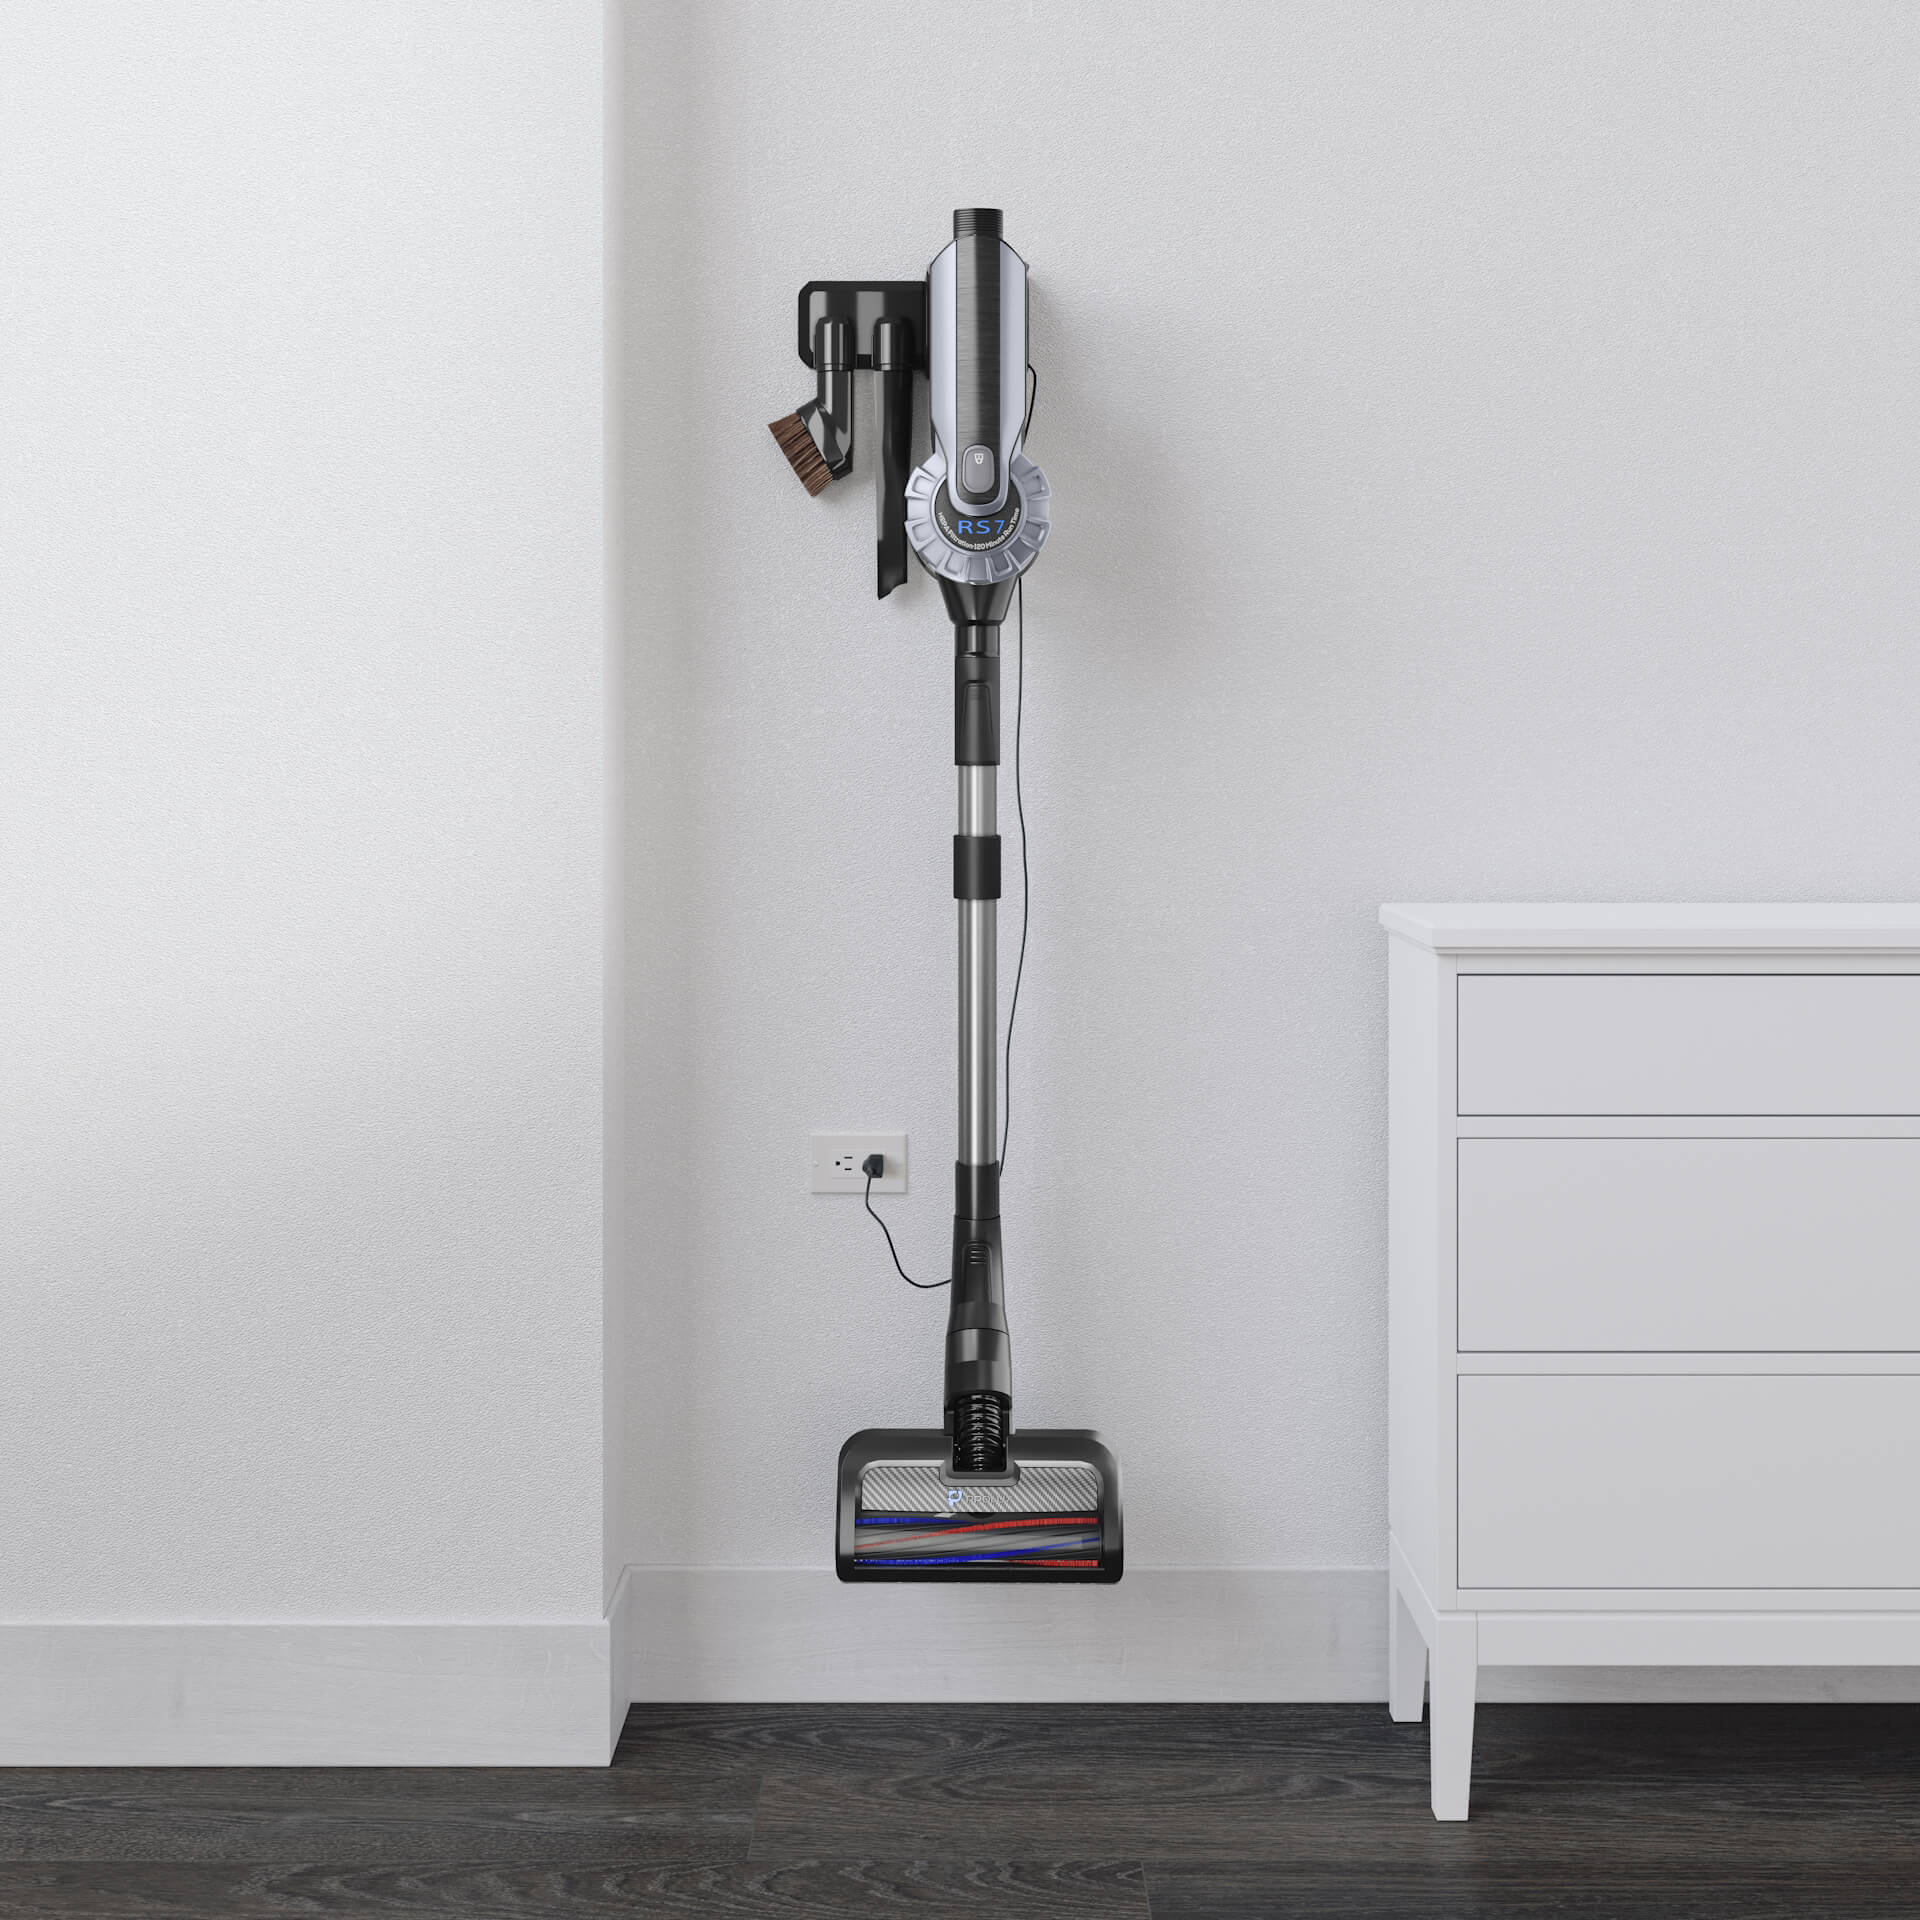 3D Rendering of a Vacuum Cleaner in an Alternative Interior